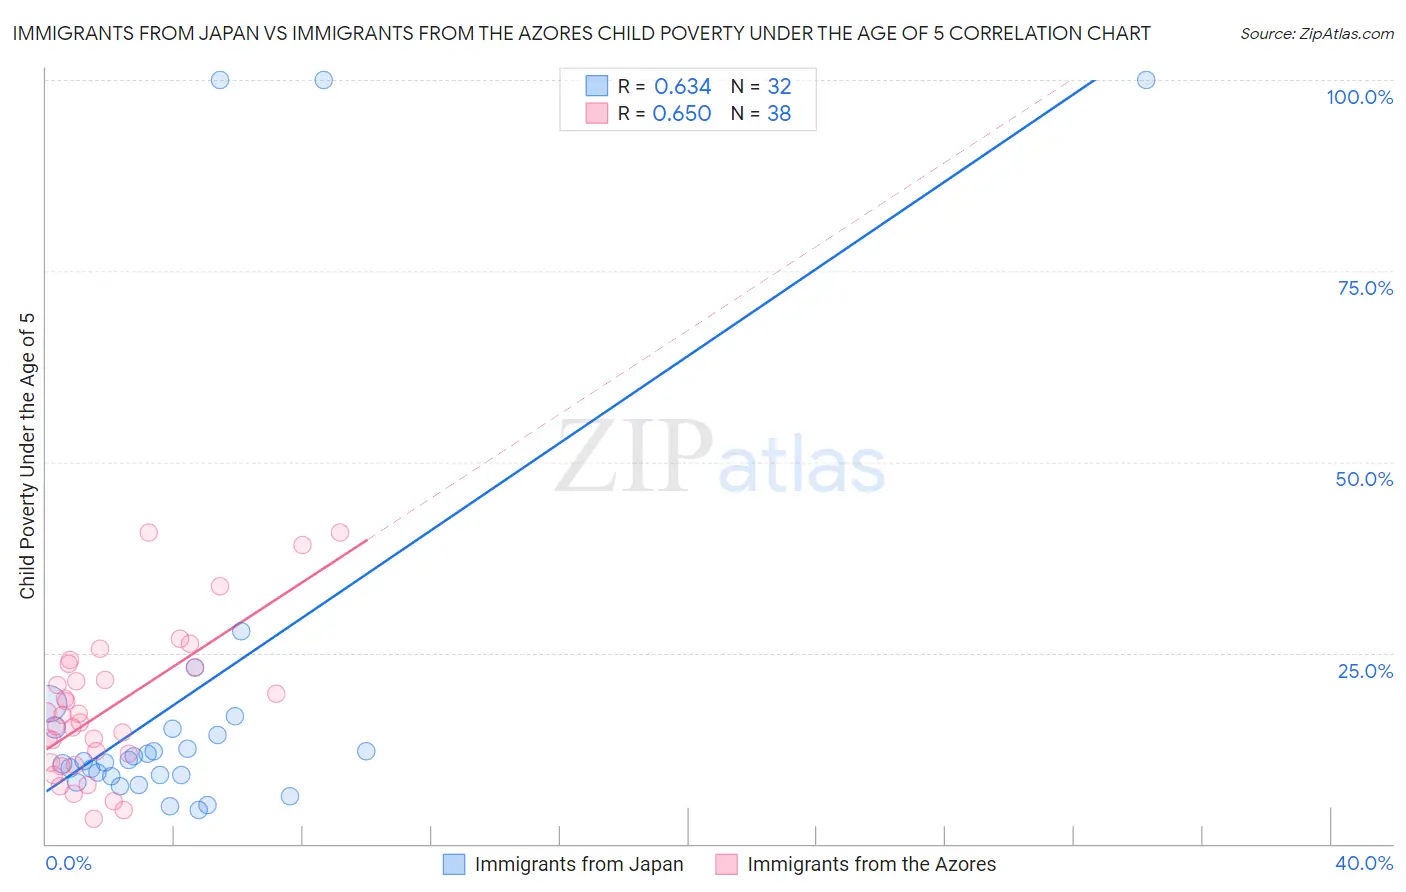 Immigrants from Japan vs Immigrants from the Azores Child Poverty Under the Age of 5